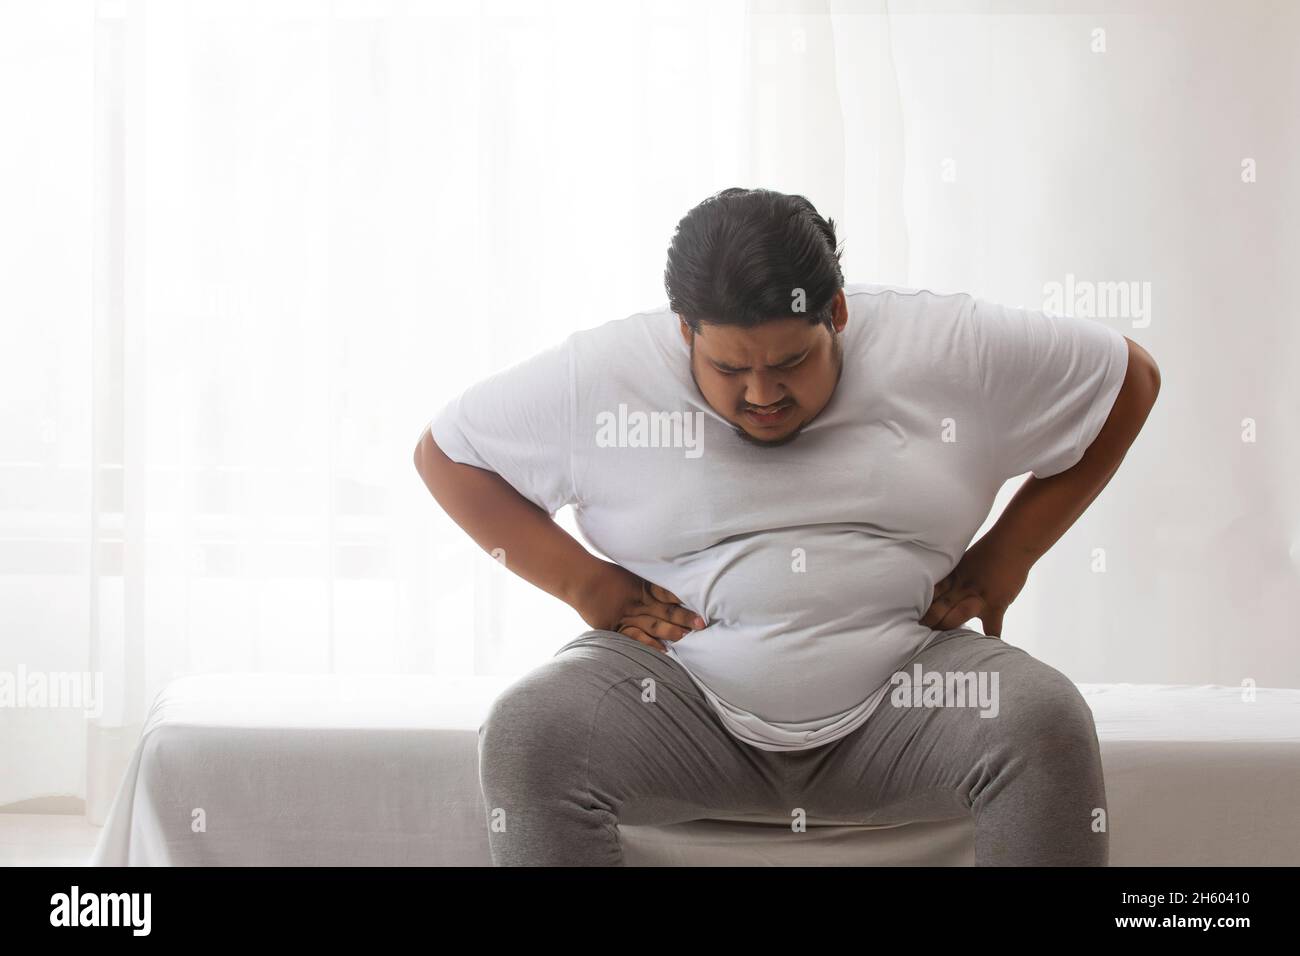 A fat man sitting and holding his belly in pain. Stock Photo